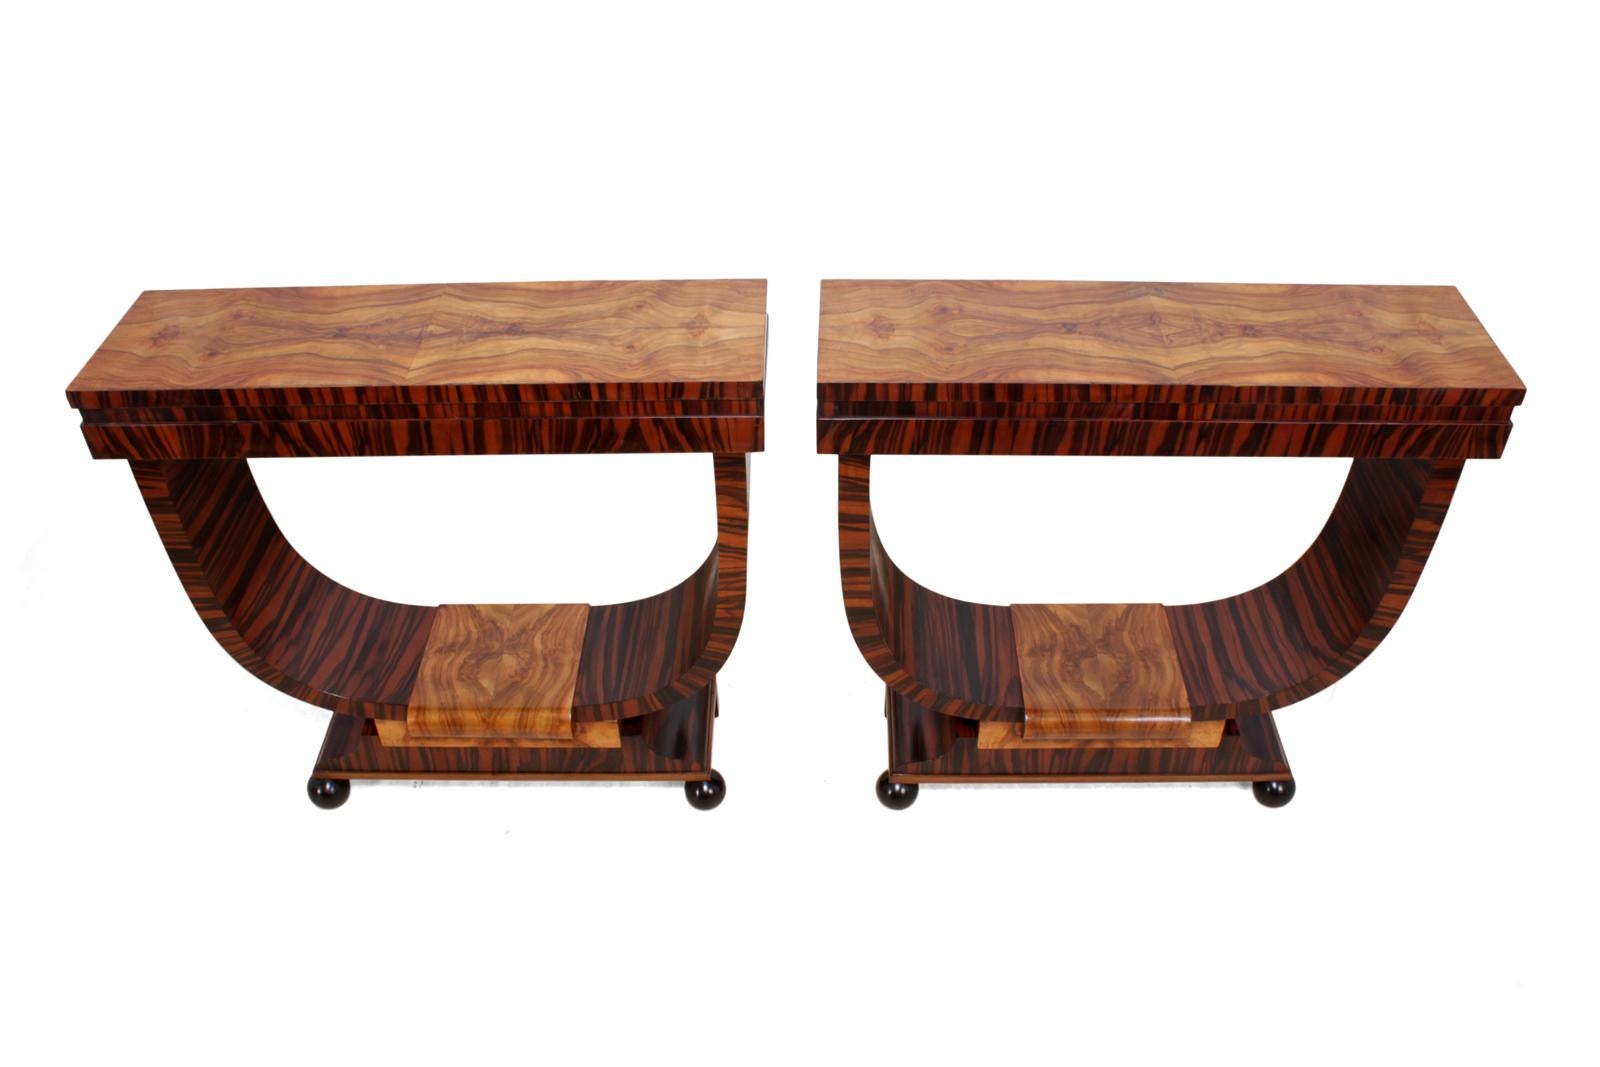 Pair of Italian Art Deco console tables, circa 1930
A pair of 1930s Italian Art Deco console tables these have been made using Macassar ebony and figured walnut, there is a secret drawer in the center of each table, they are in very good condition